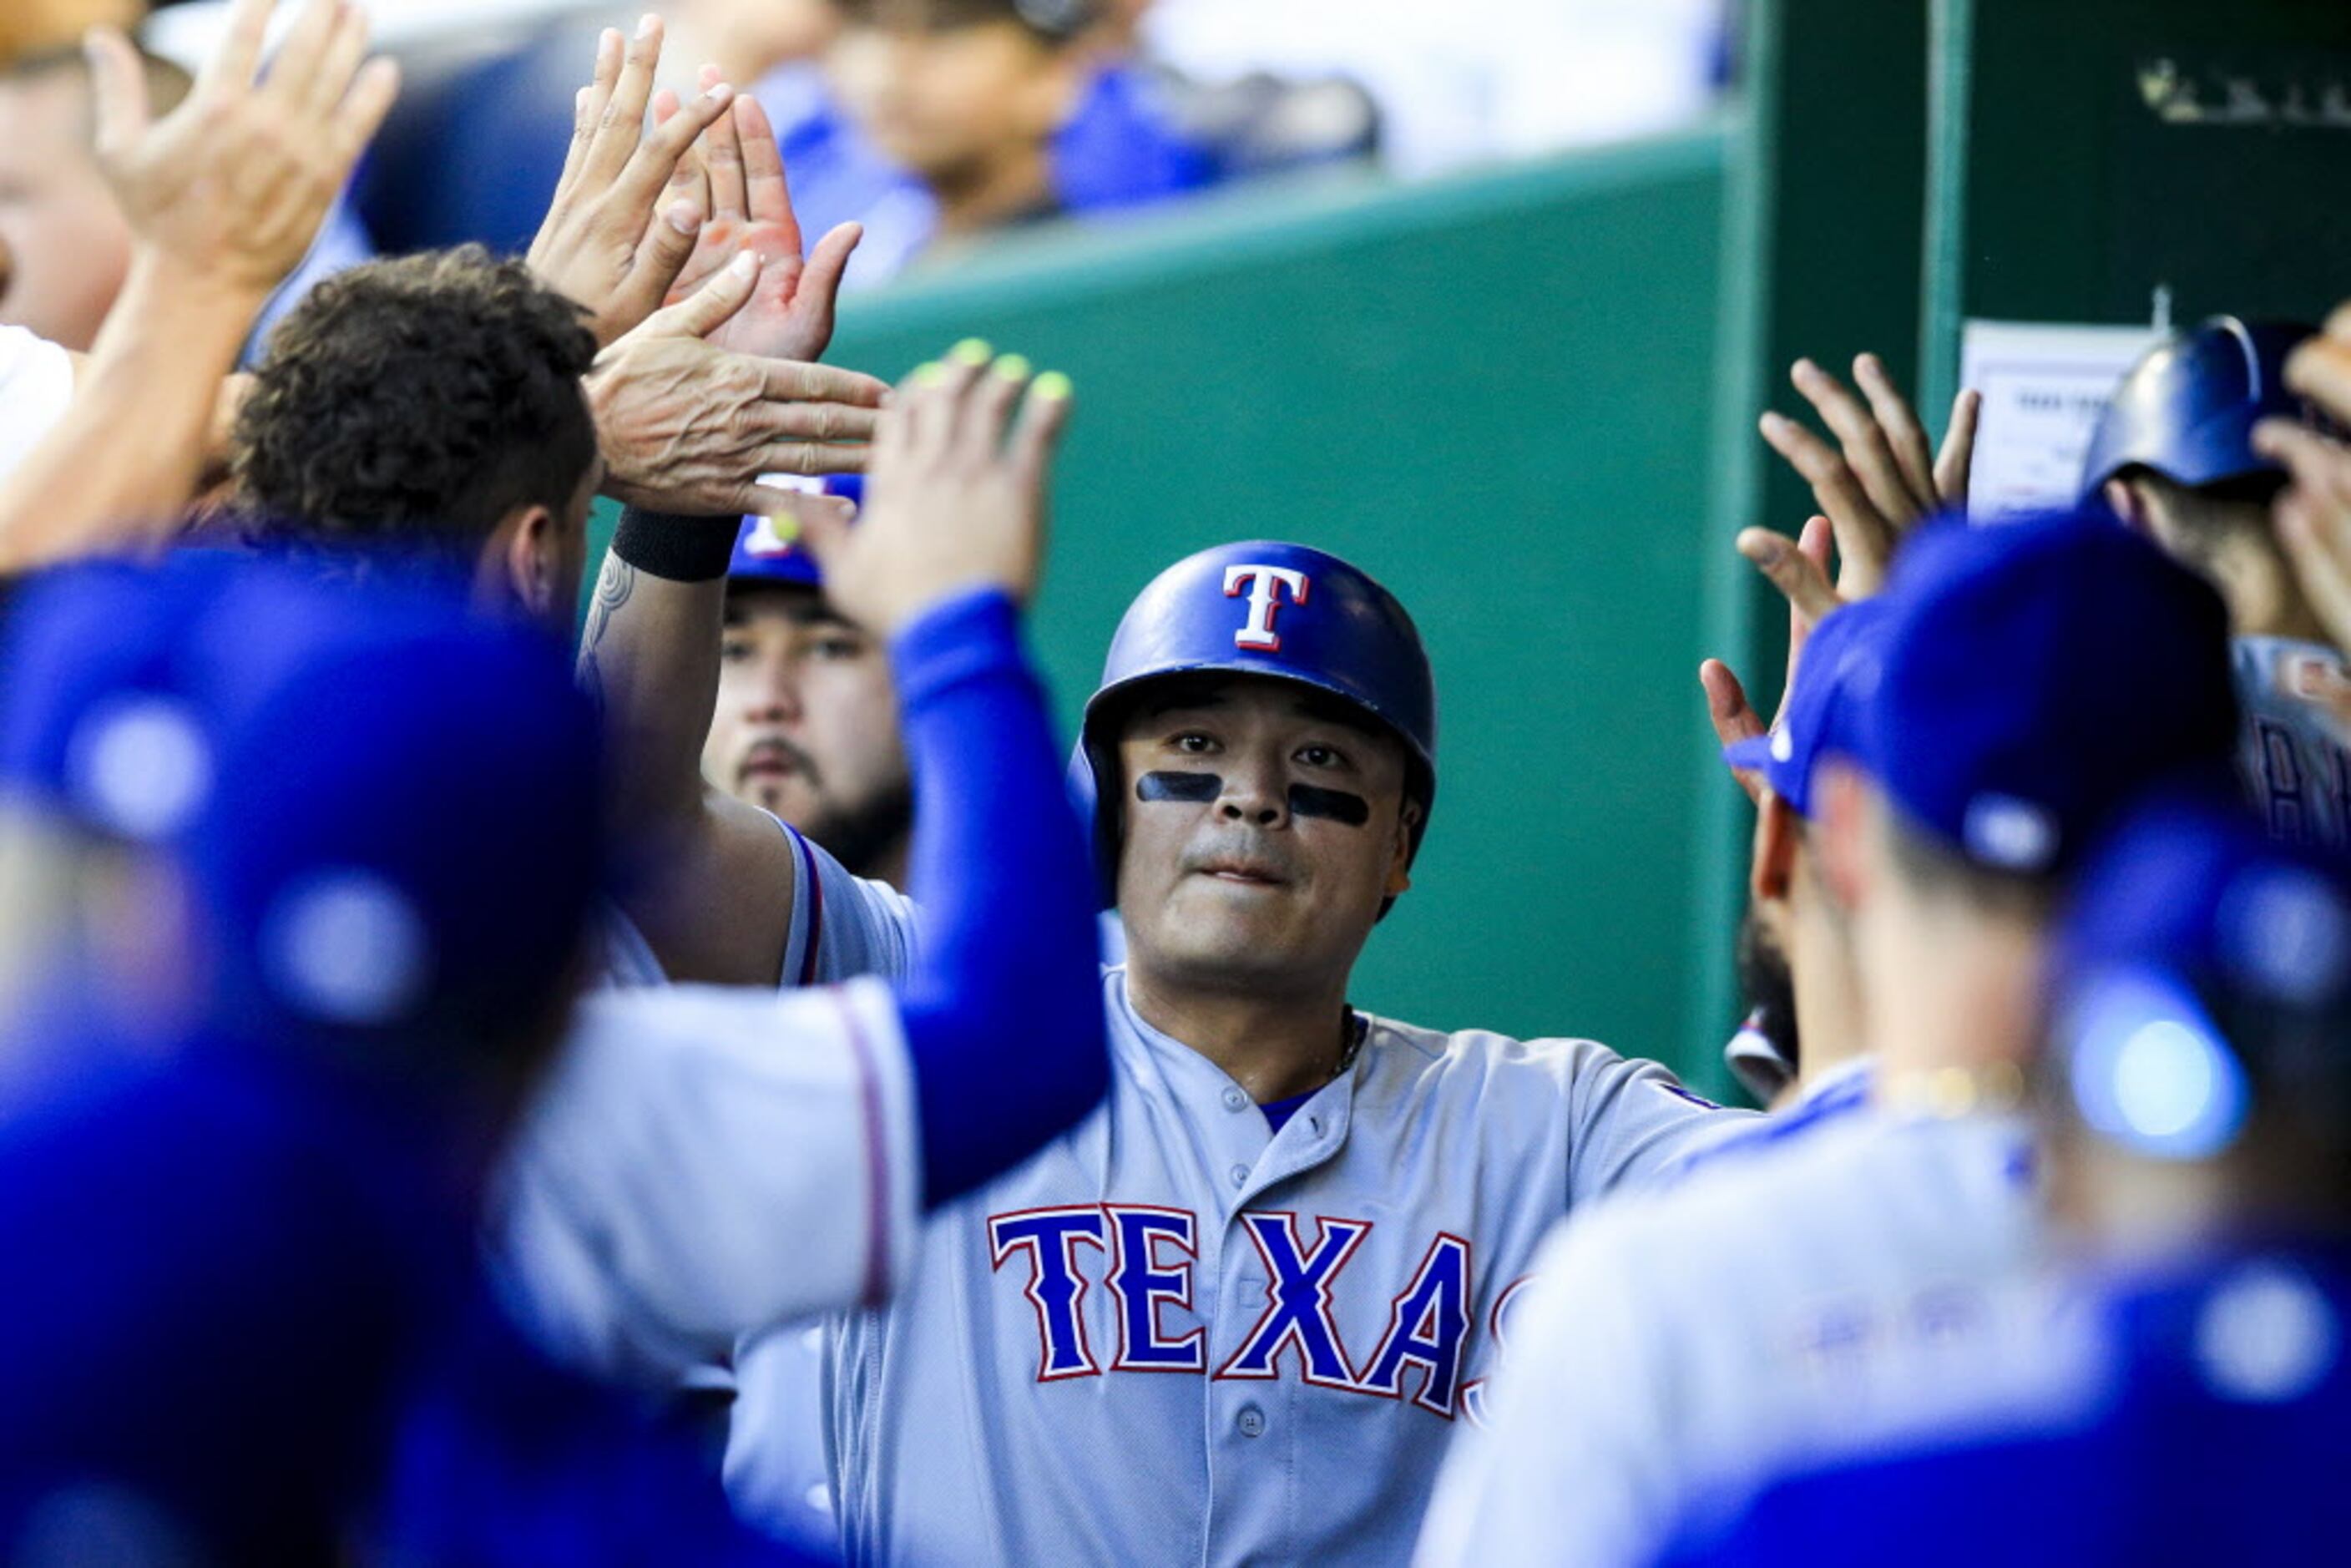 Report: Ex-Ranger Shin-Soo Choo signs with SK Wyverns in Korean